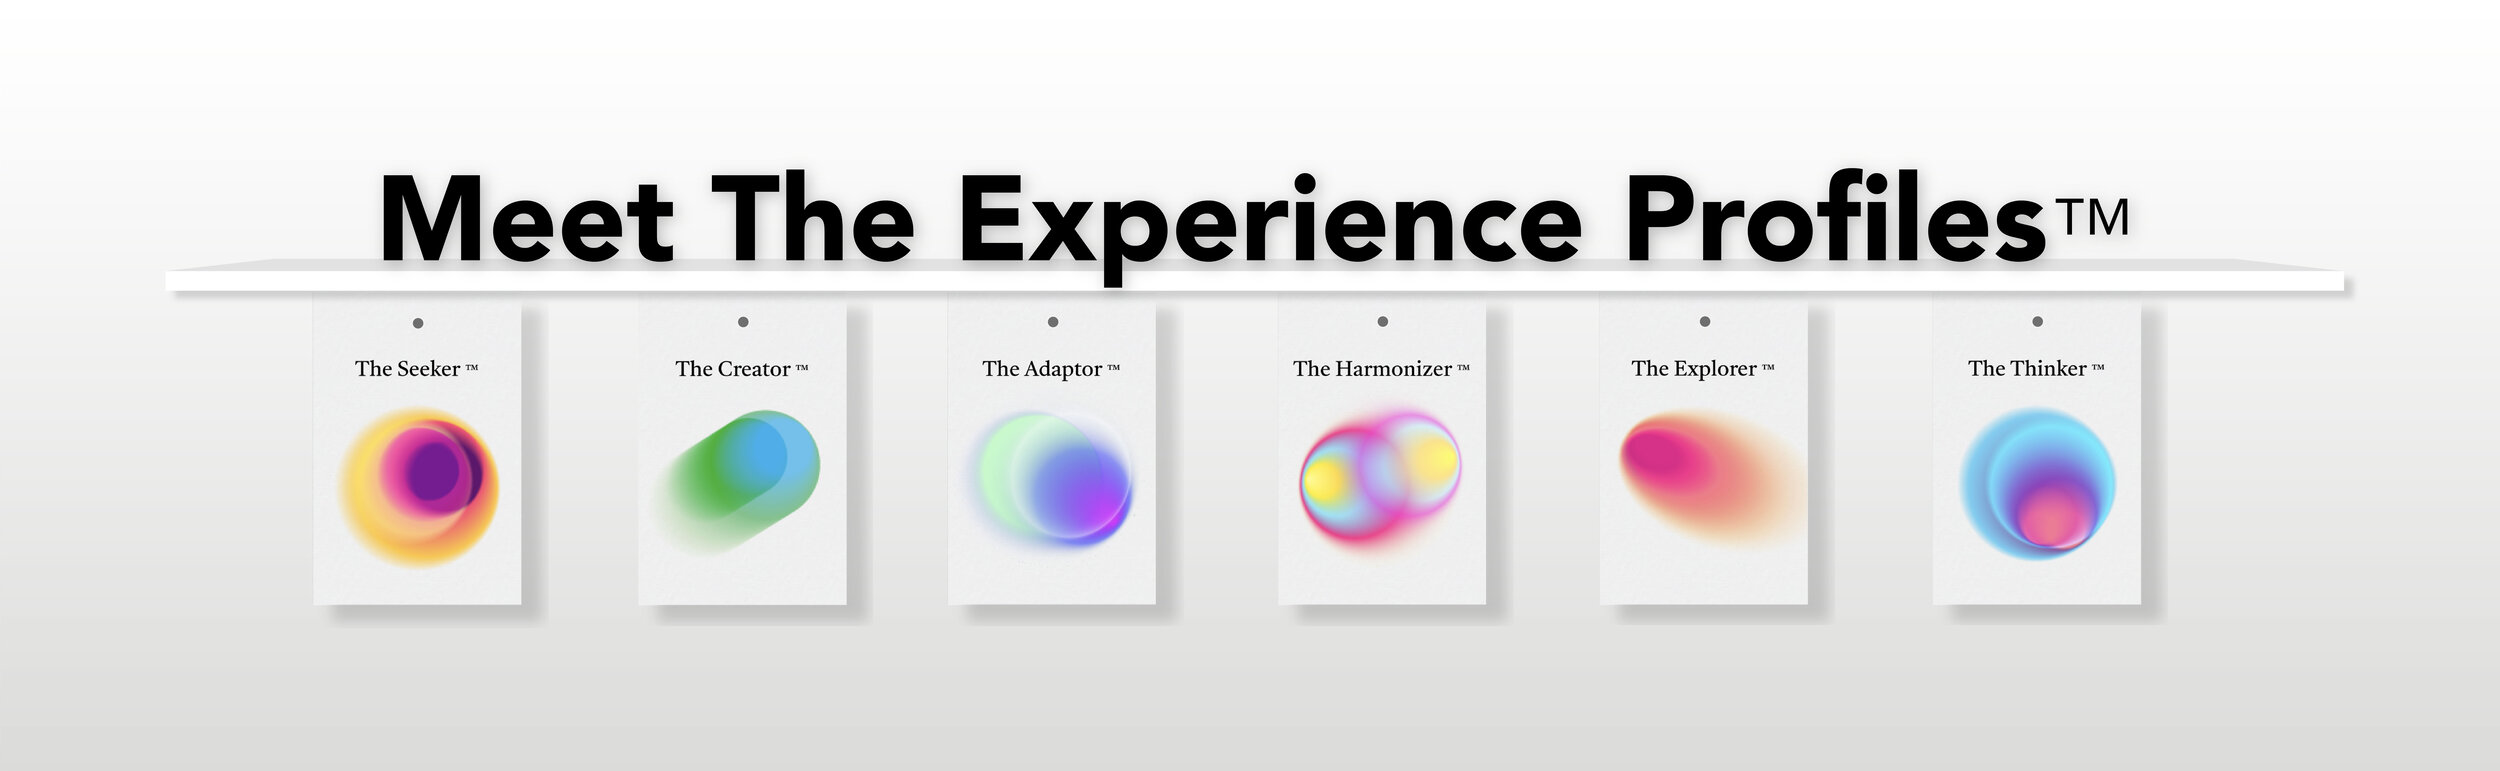 meet the experience profiles